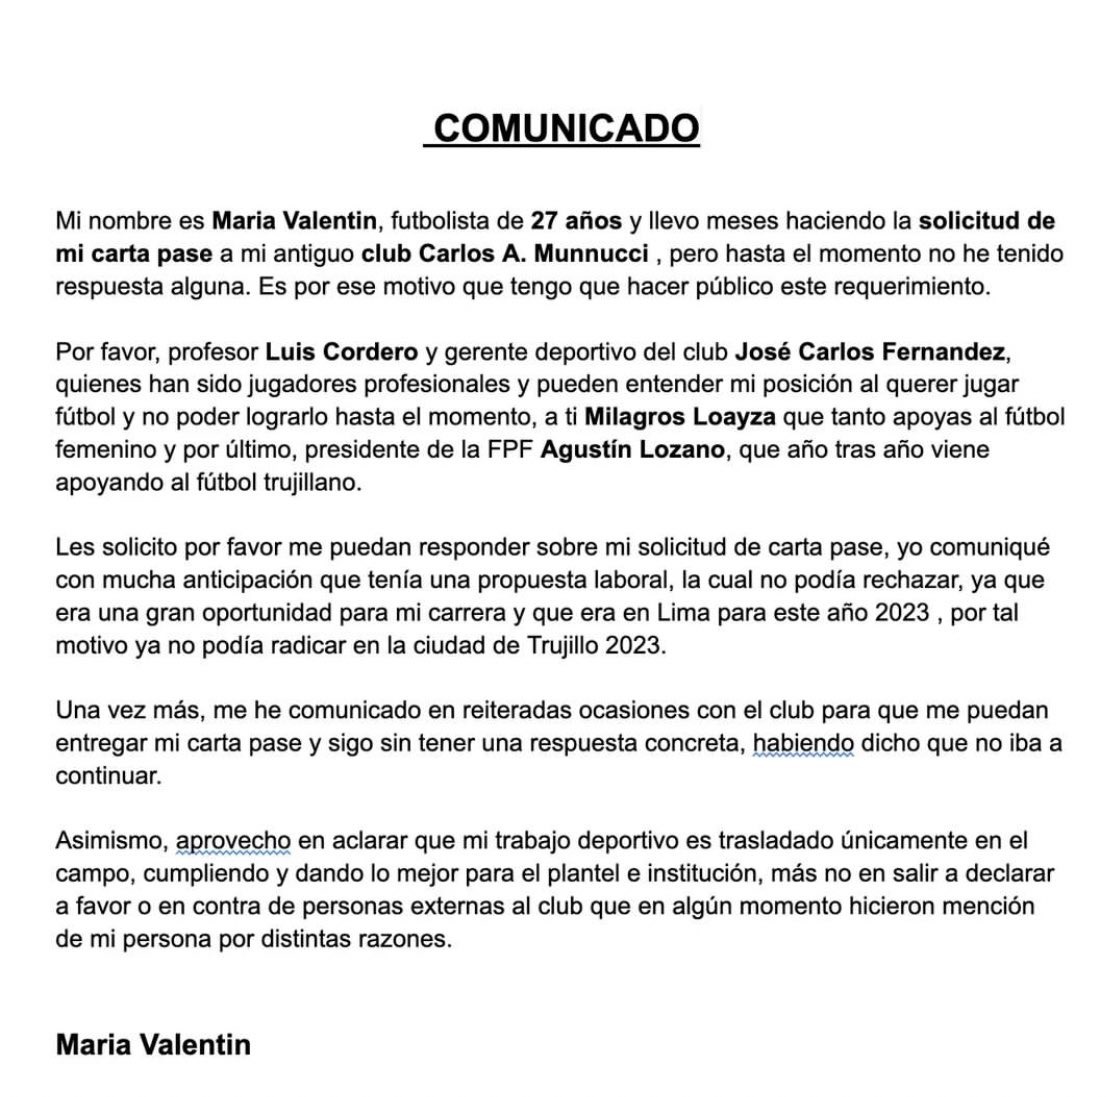 María Valentin, Carlos A. Manucci's soccer player, sent a statement requesting her transfer letter to the Trujillo club.